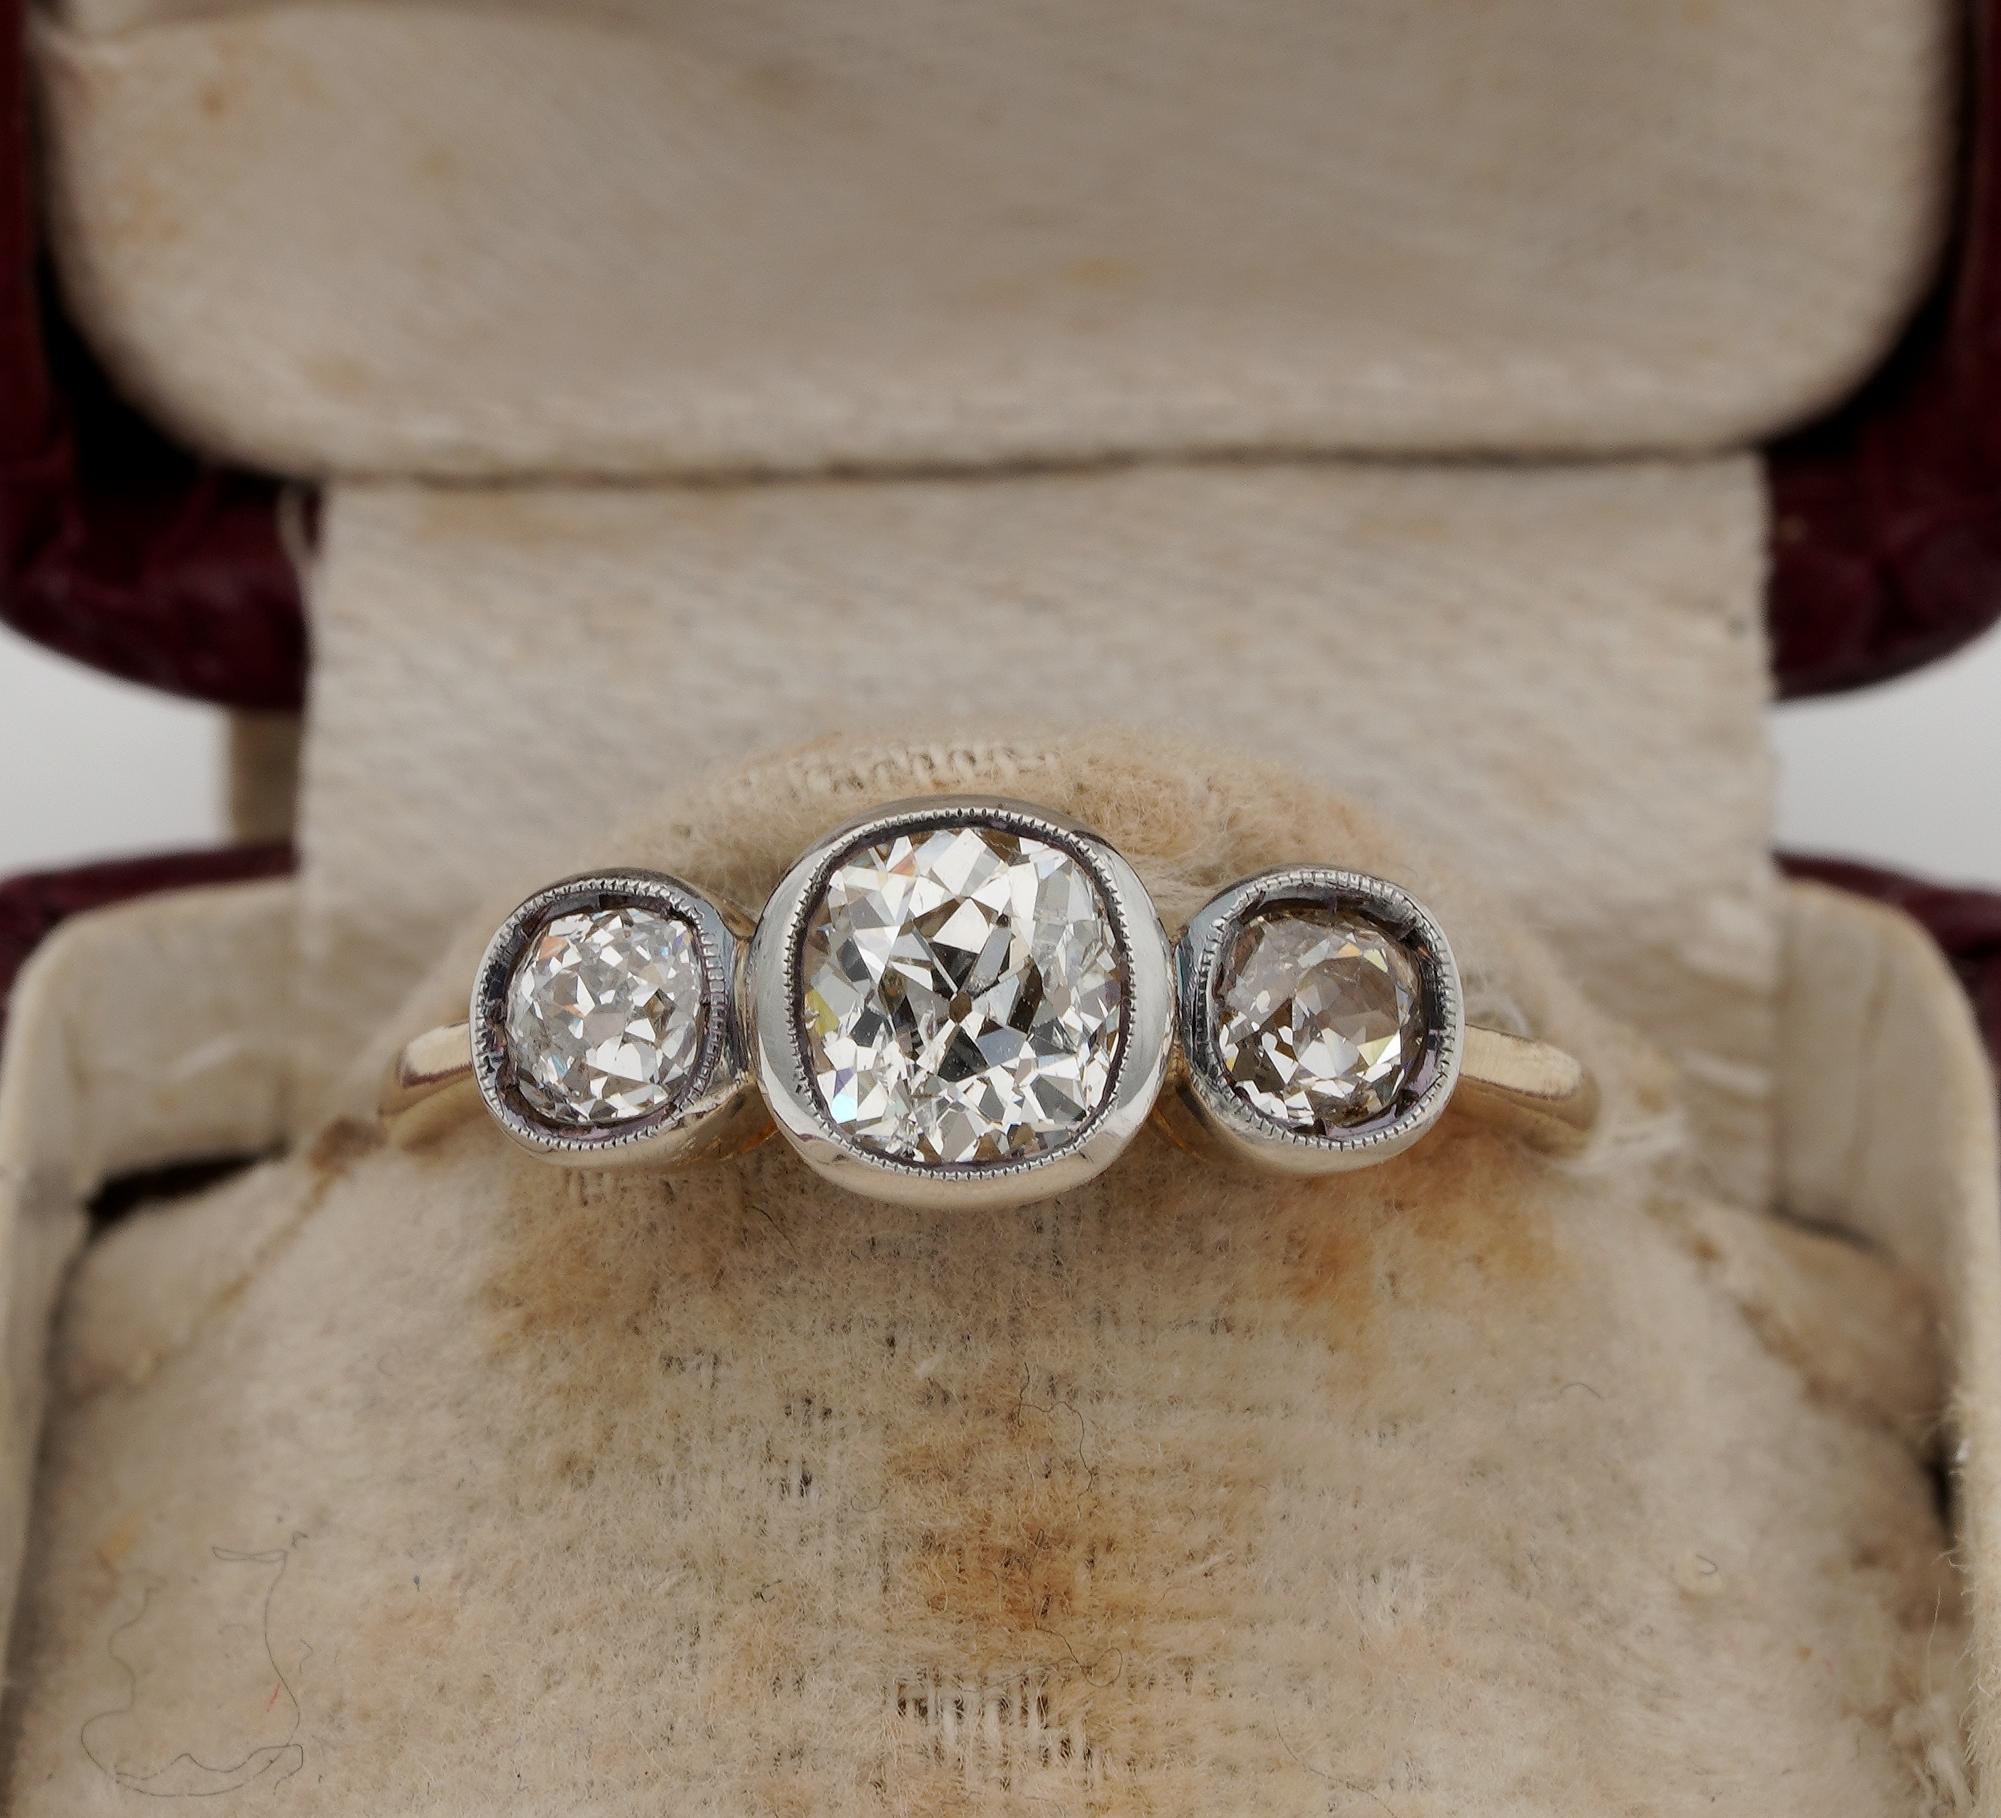 This beautiful Victorian ring is 1890/1900 ca
Ring has been hand crafted of solid 18 KT gold with silver portions over the top for the Diamond housing
Centrally set with a bright  white earth mined full of sparkle .80 Ct old mime cut Diamonds rated 